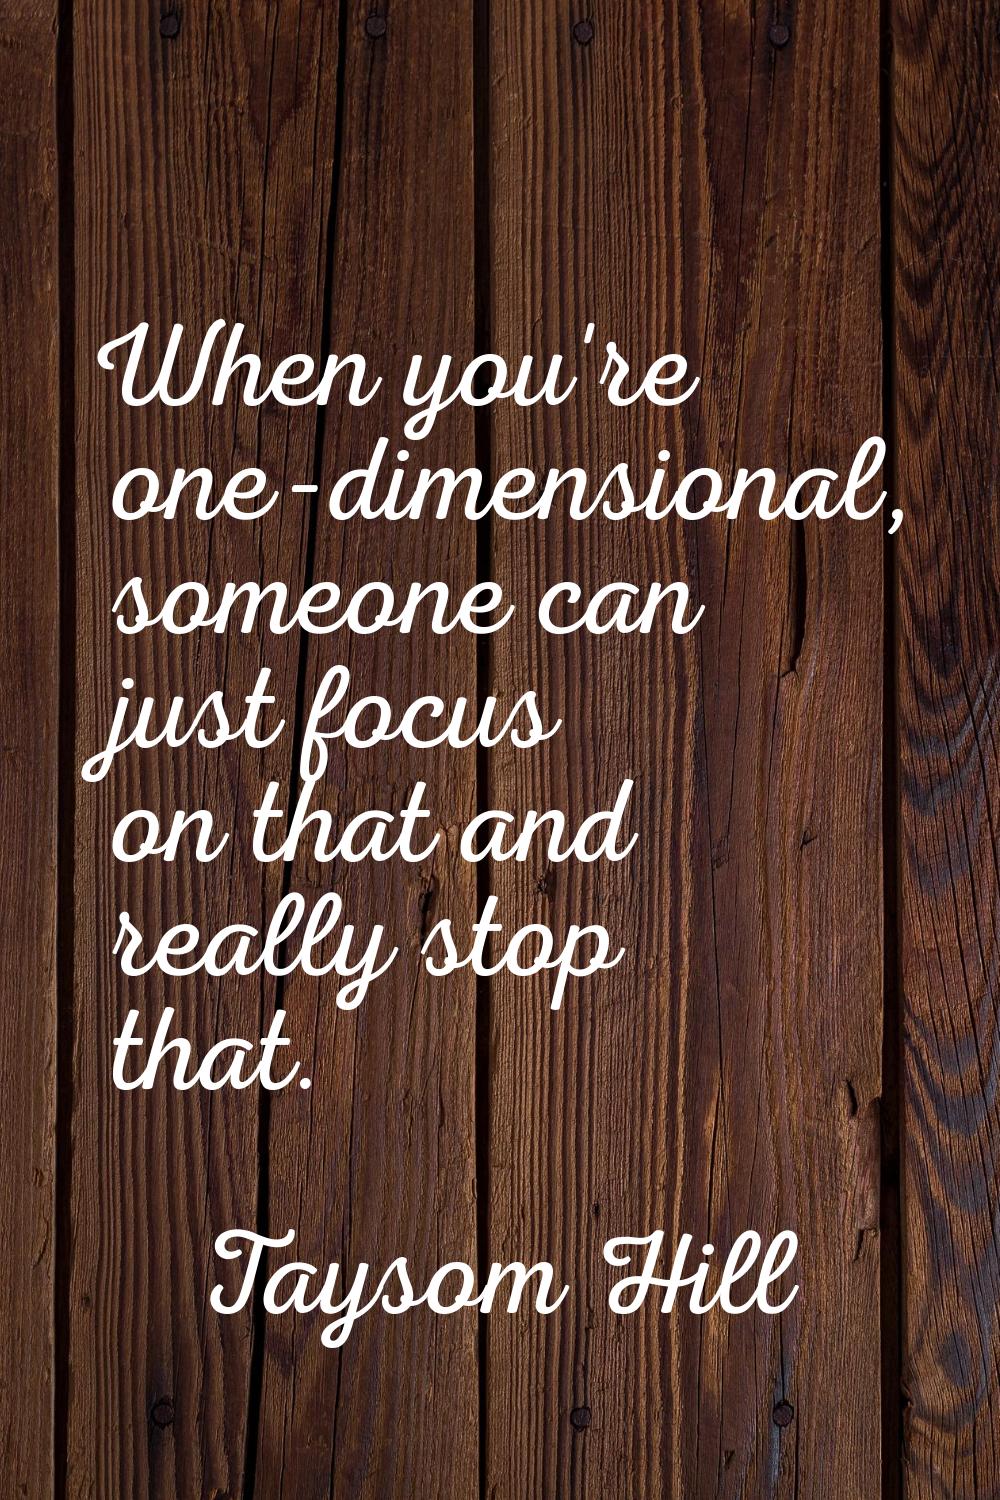 When you're one-dimensional, someone can just focus on that and really stop that.